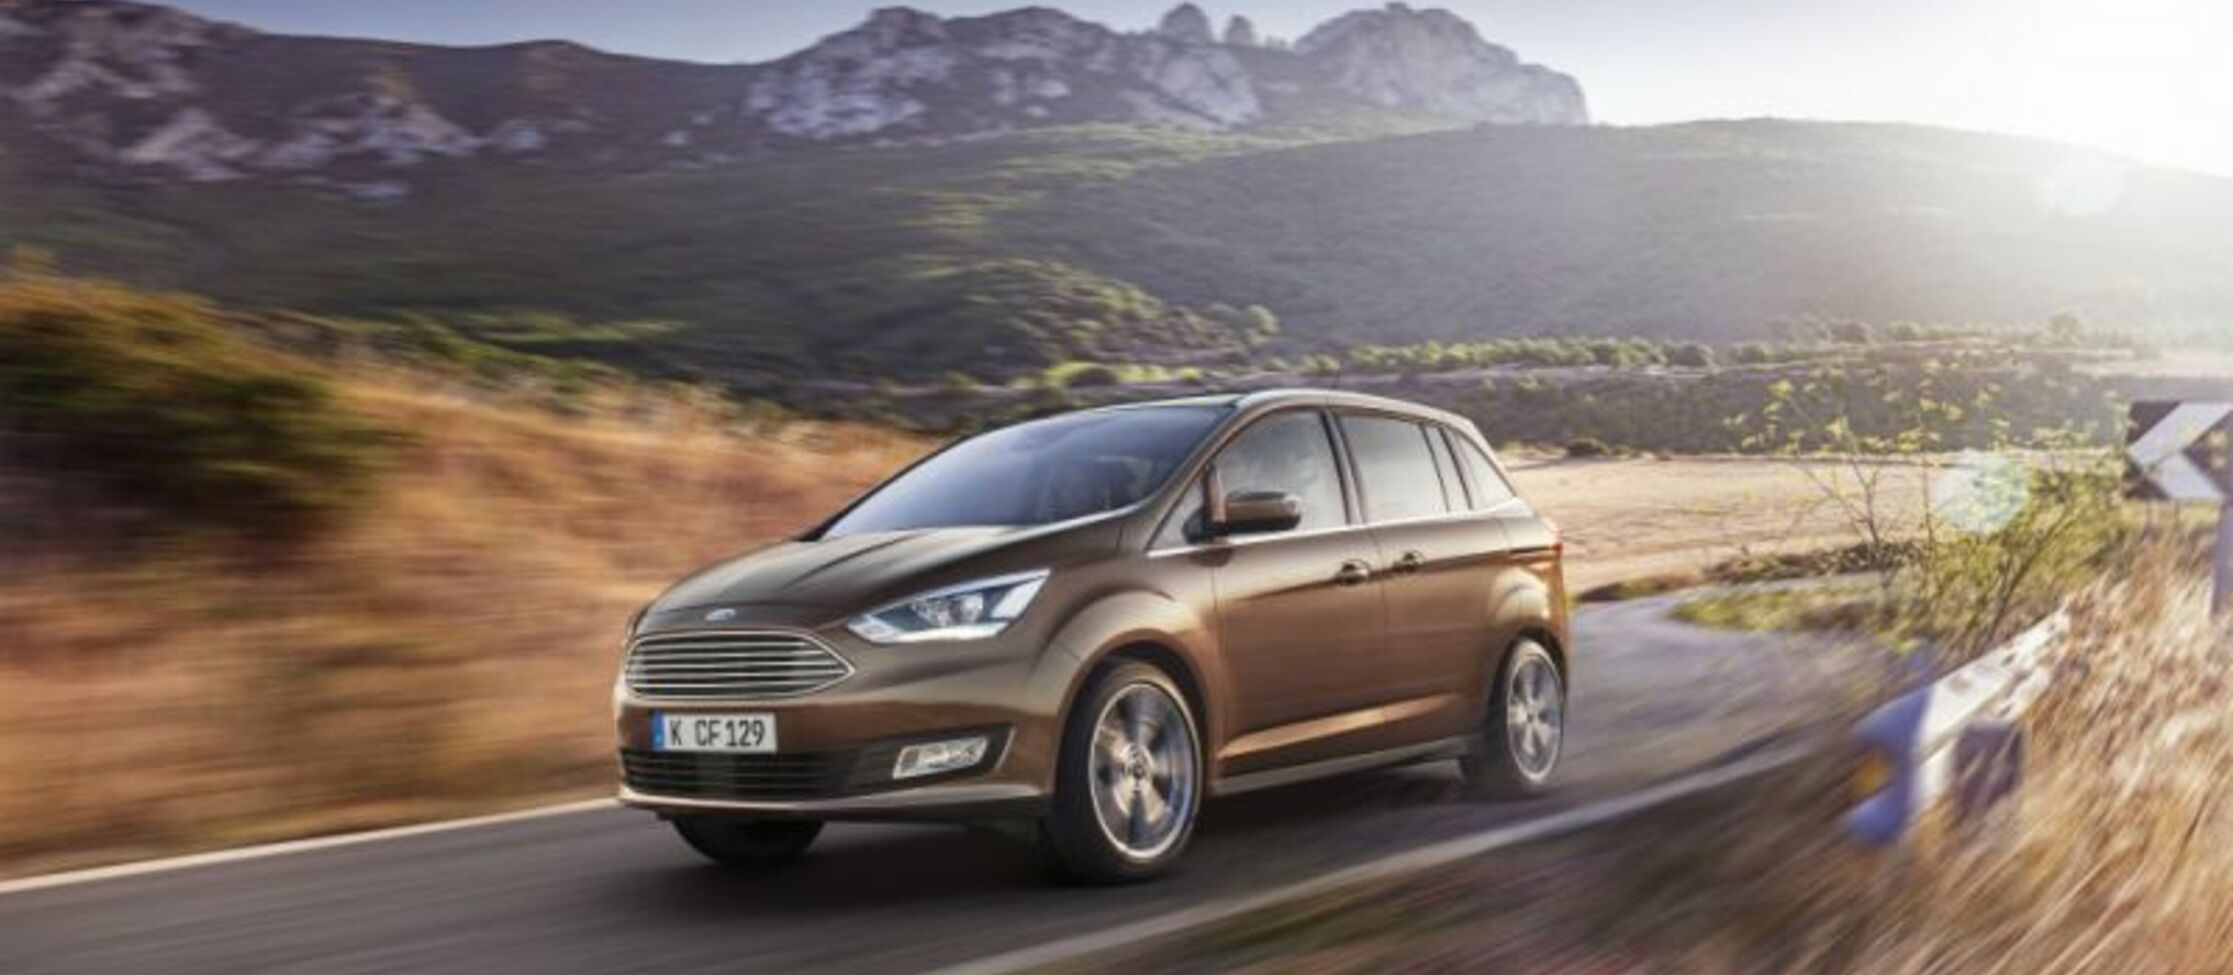 Ford Grand C-MAX (facelift 2015) 1.5 EcoBoost (150 Hp) S&S 2015, 2016, 2017, 2018, 2019, 2020, 2021